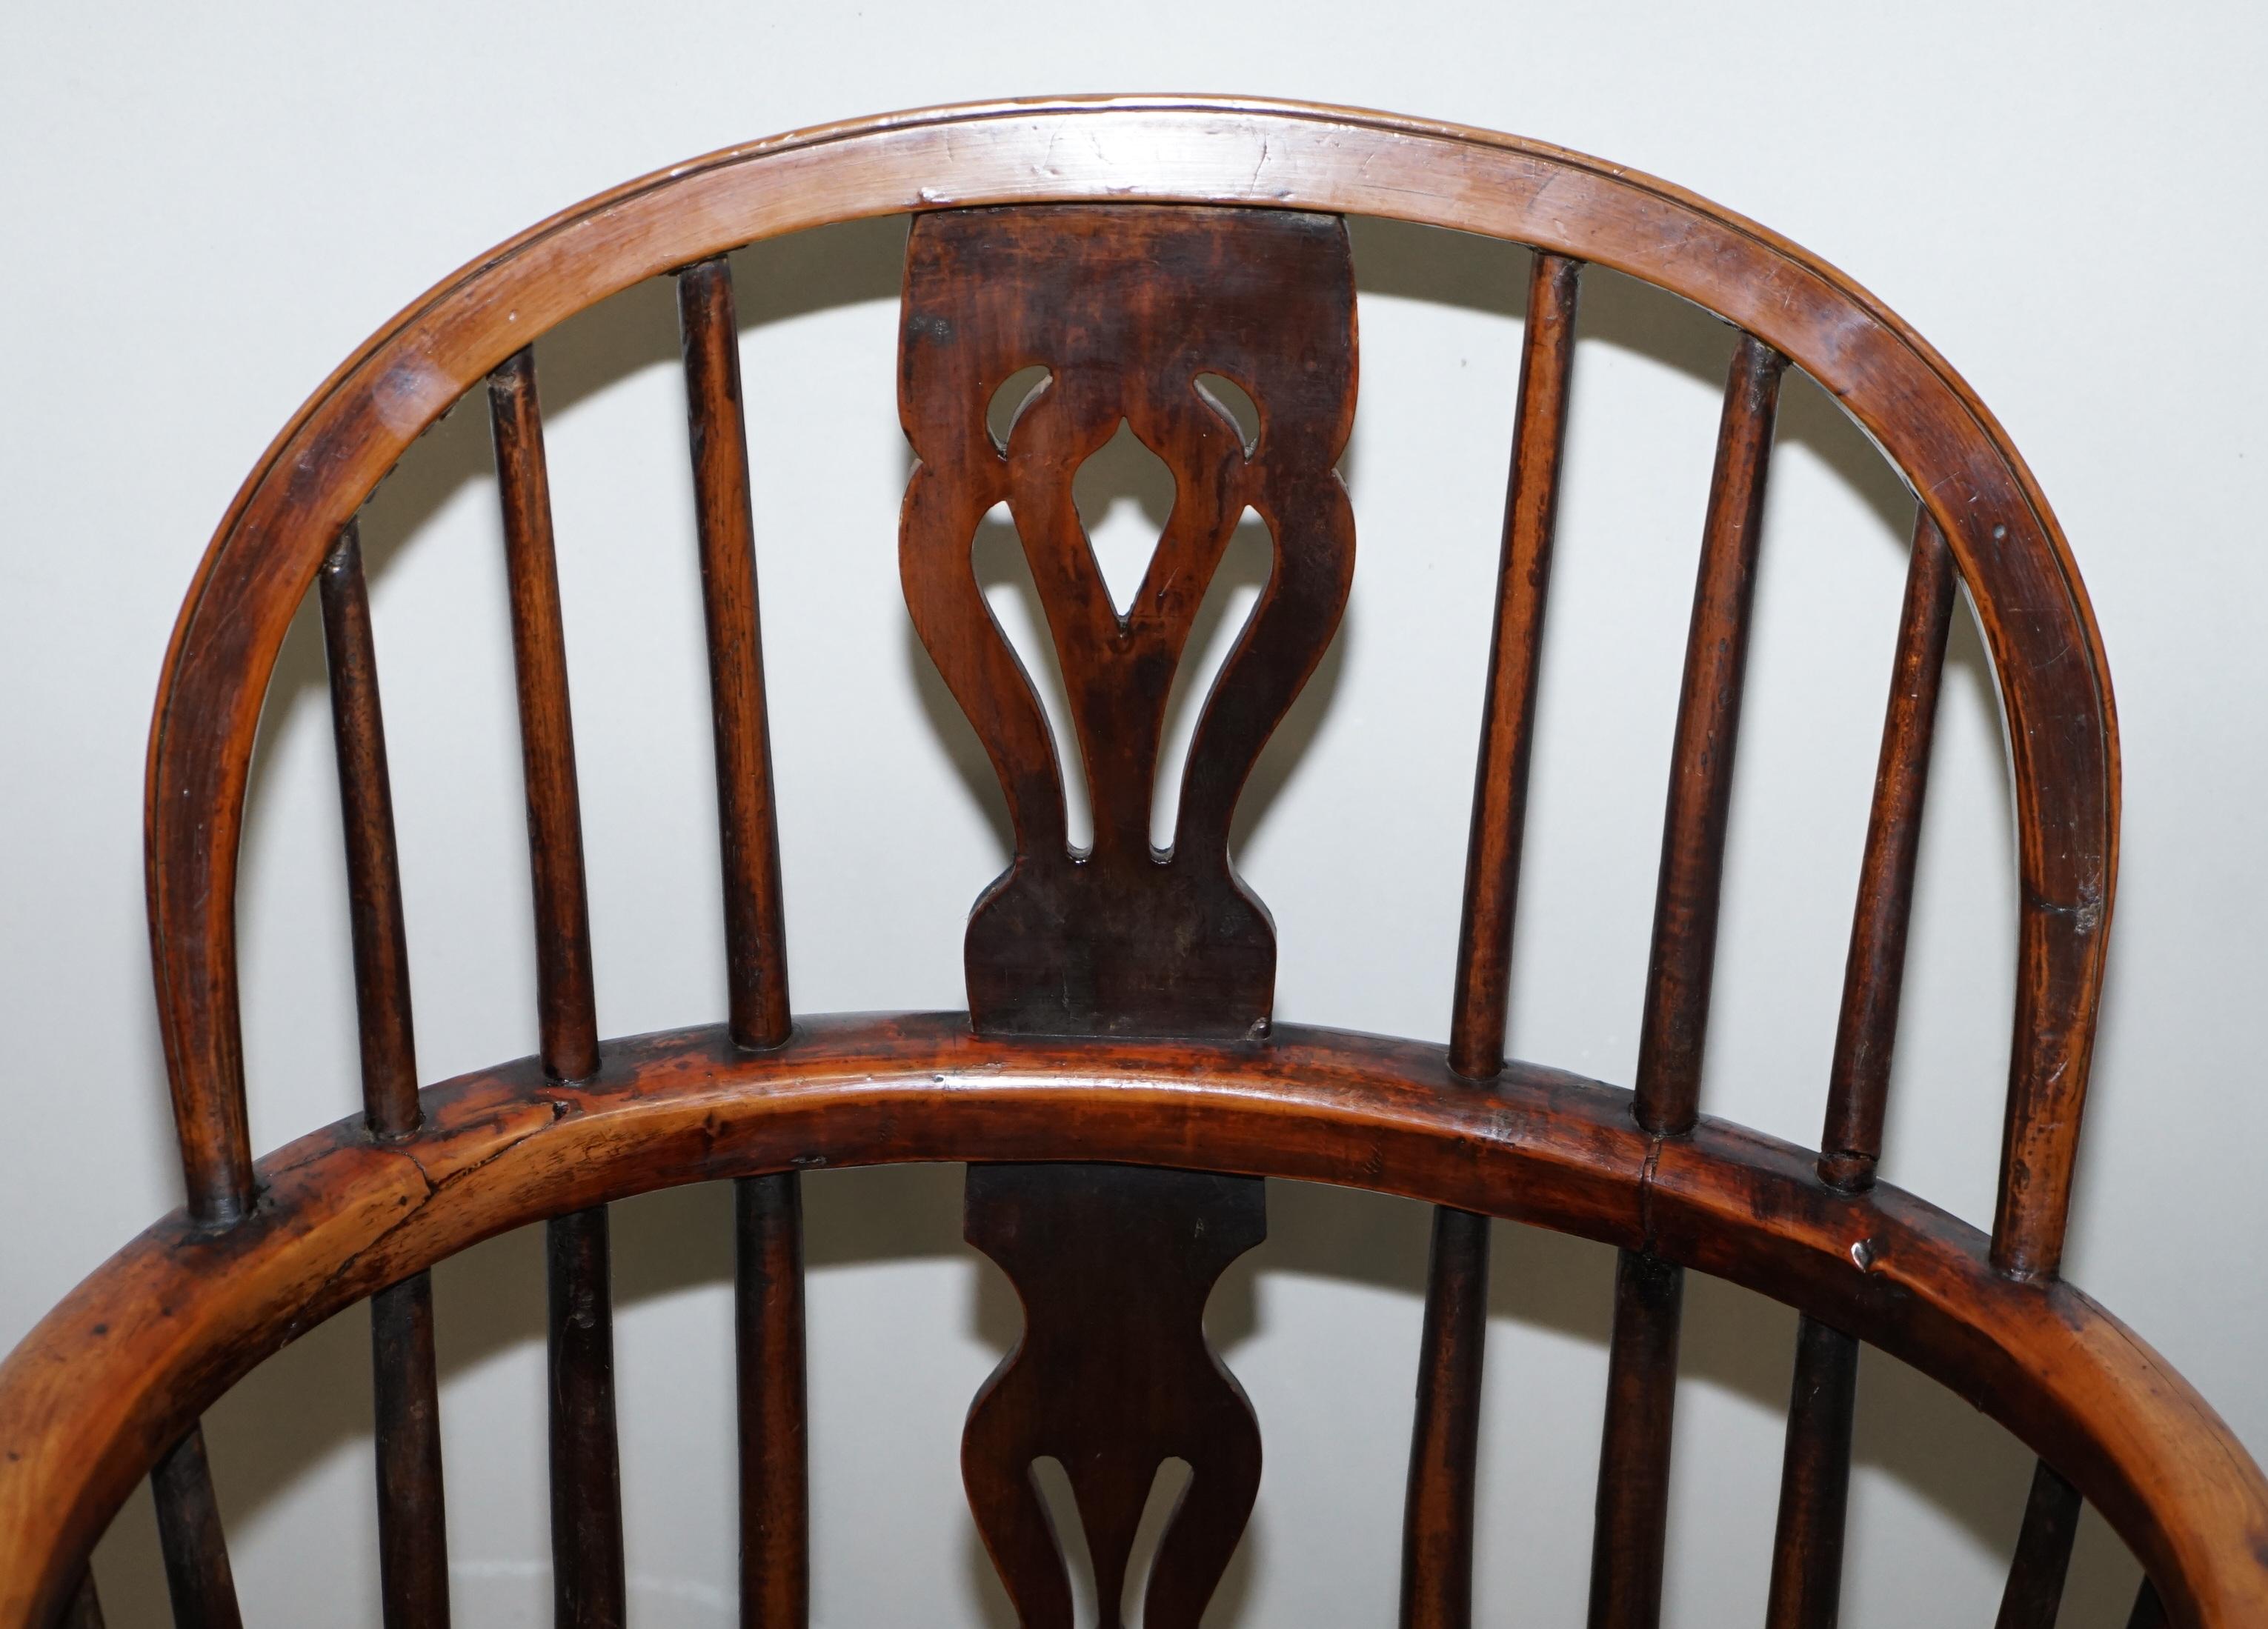 Mid-19th Century 1 of 6 Solid Elm Windsor Armchairs circa 1860 English Countryhouse Furniture For Sale